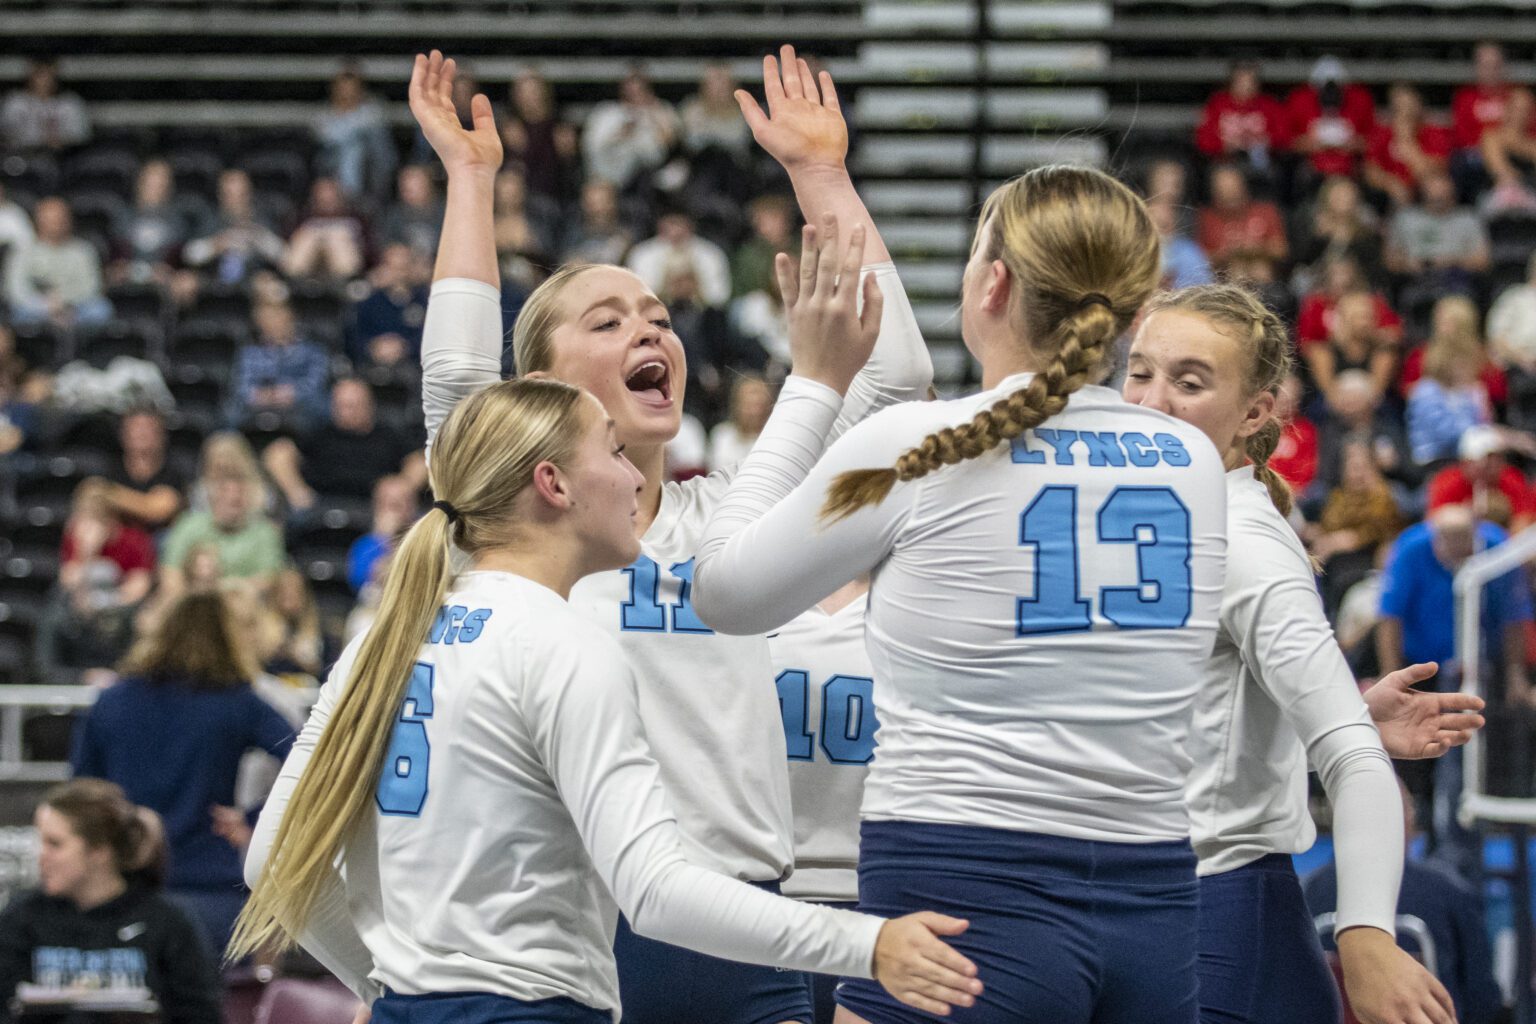 Lynden Christian's Reganne Arnold (11) throws her hands up in celebration during a 1A state tournament match against La Salle on Nov. 11.